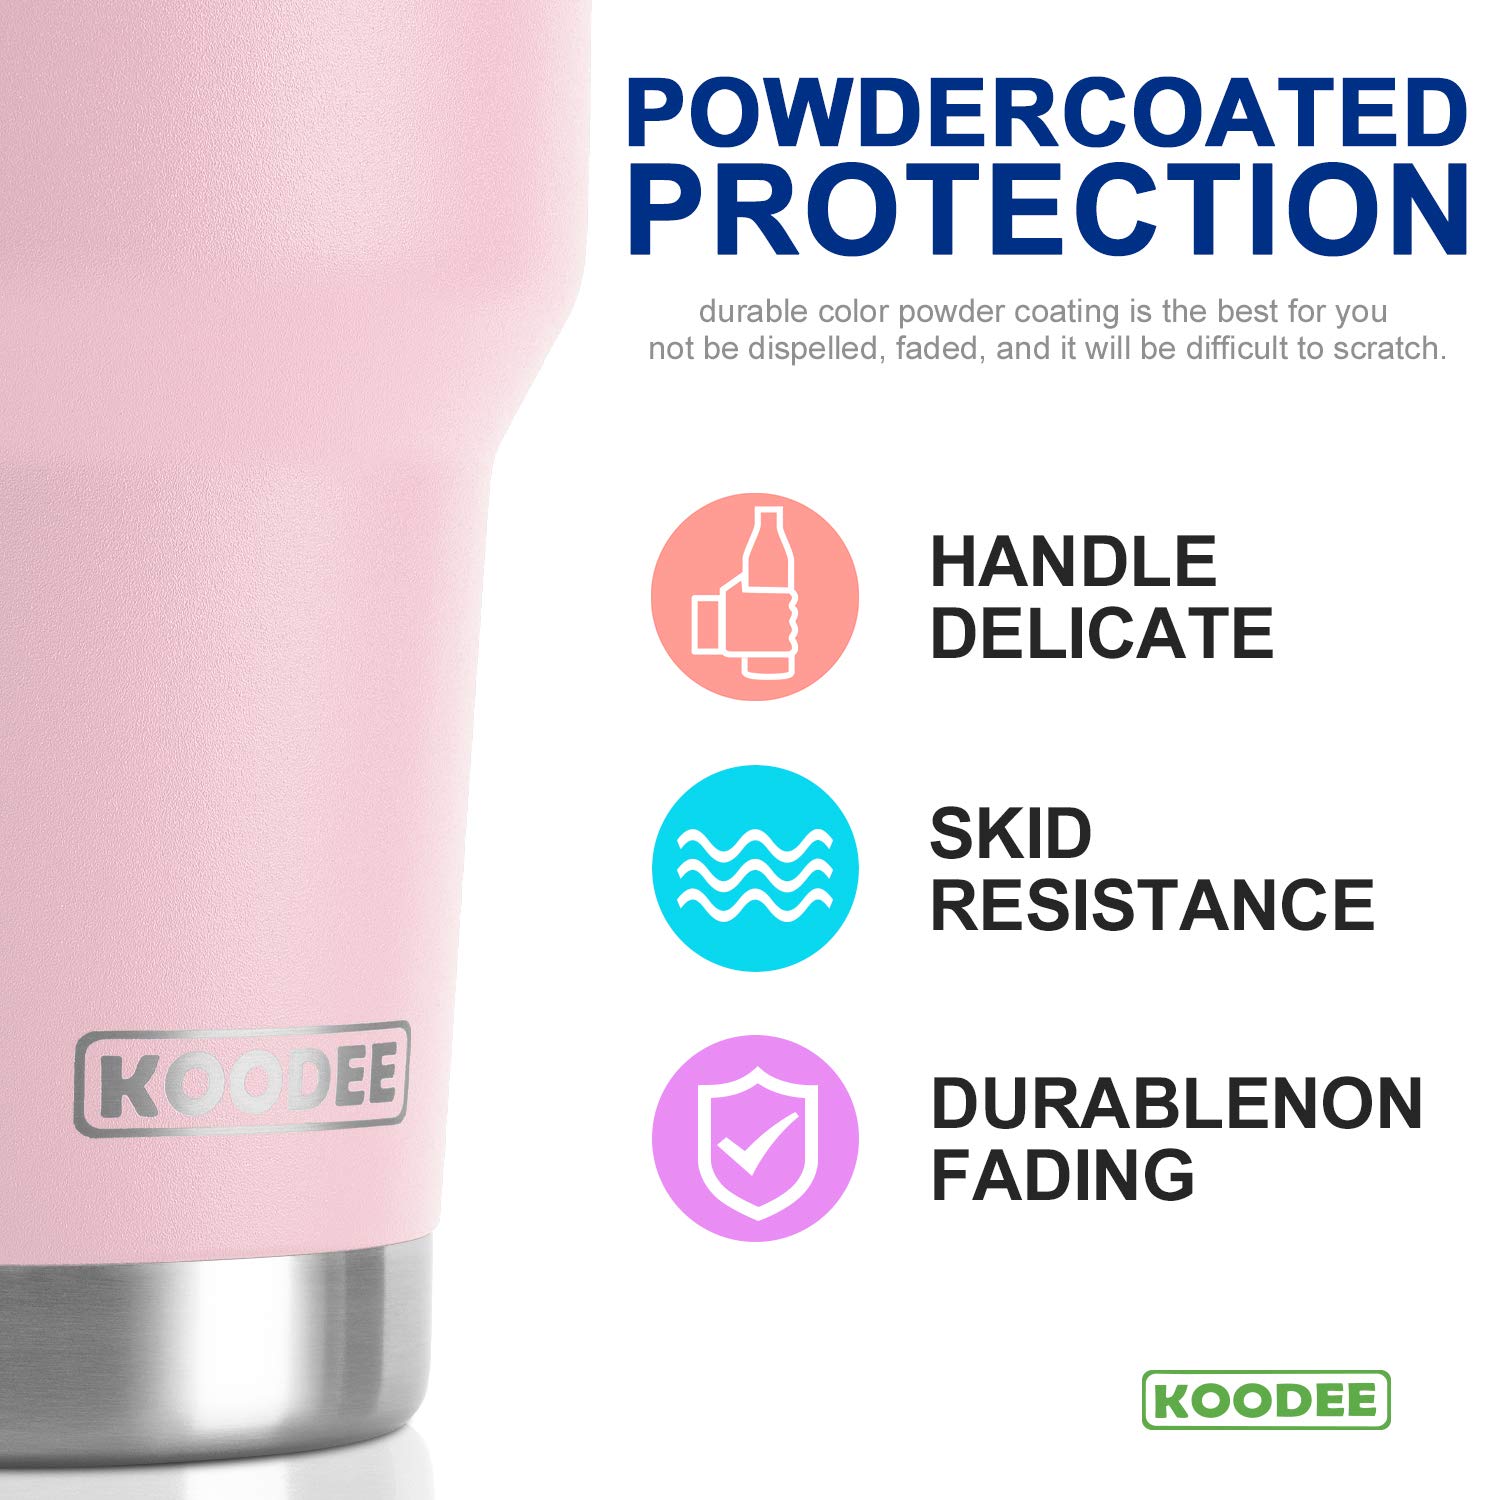 koodee Insulated Coffee Tumbler 30 oz Stainless Steel Double Wall Travel Coffee Mug with Lid and Straw, Handle (30 oz, Pink)